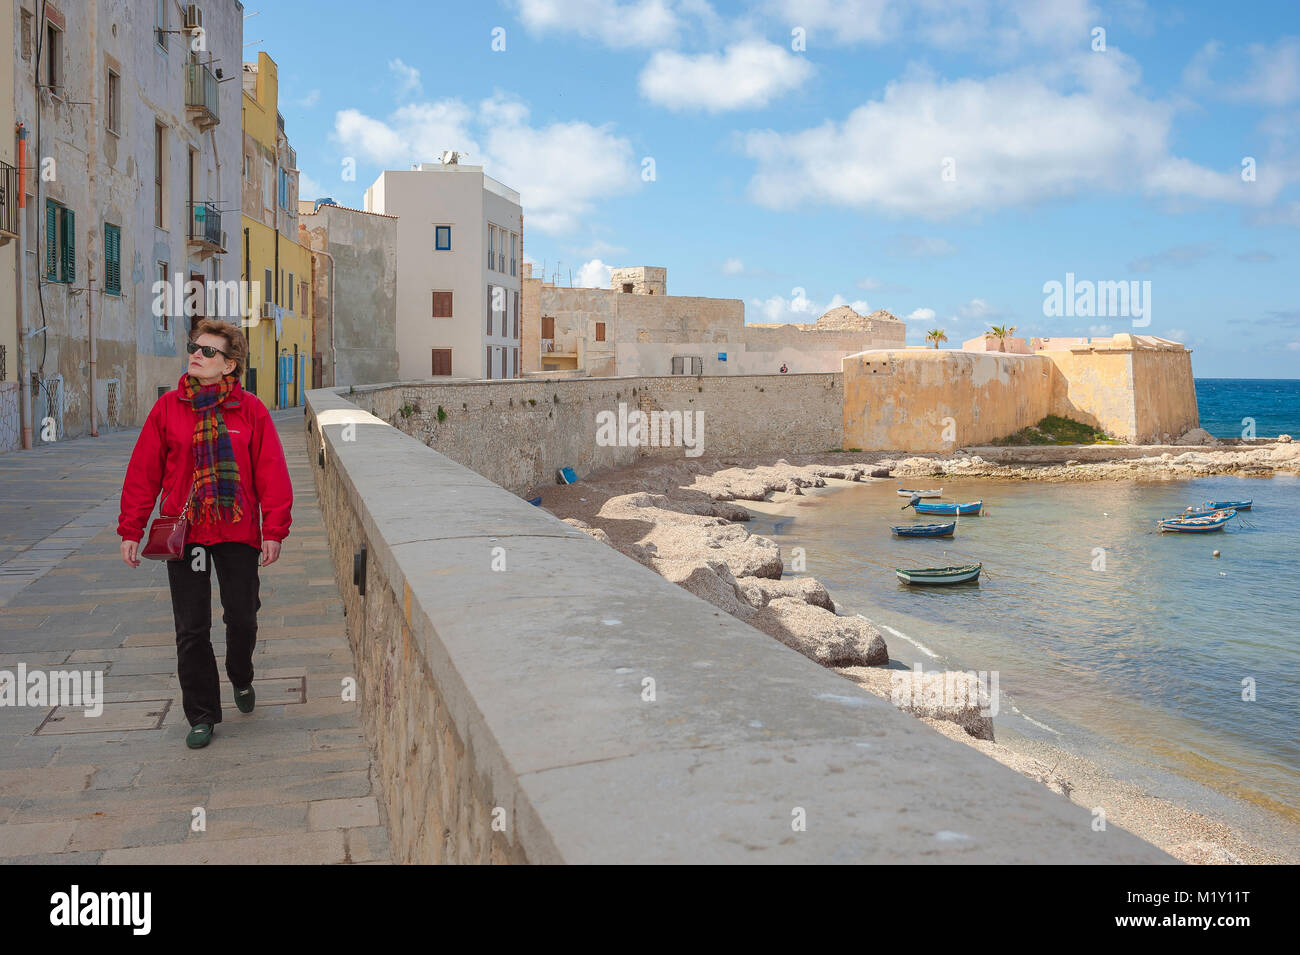 Trapani Sicily sea wall, view of a single mature woman walking along the sea wall in Trapani harbor, Sicily (MODEL RELEASED) Stock Photo